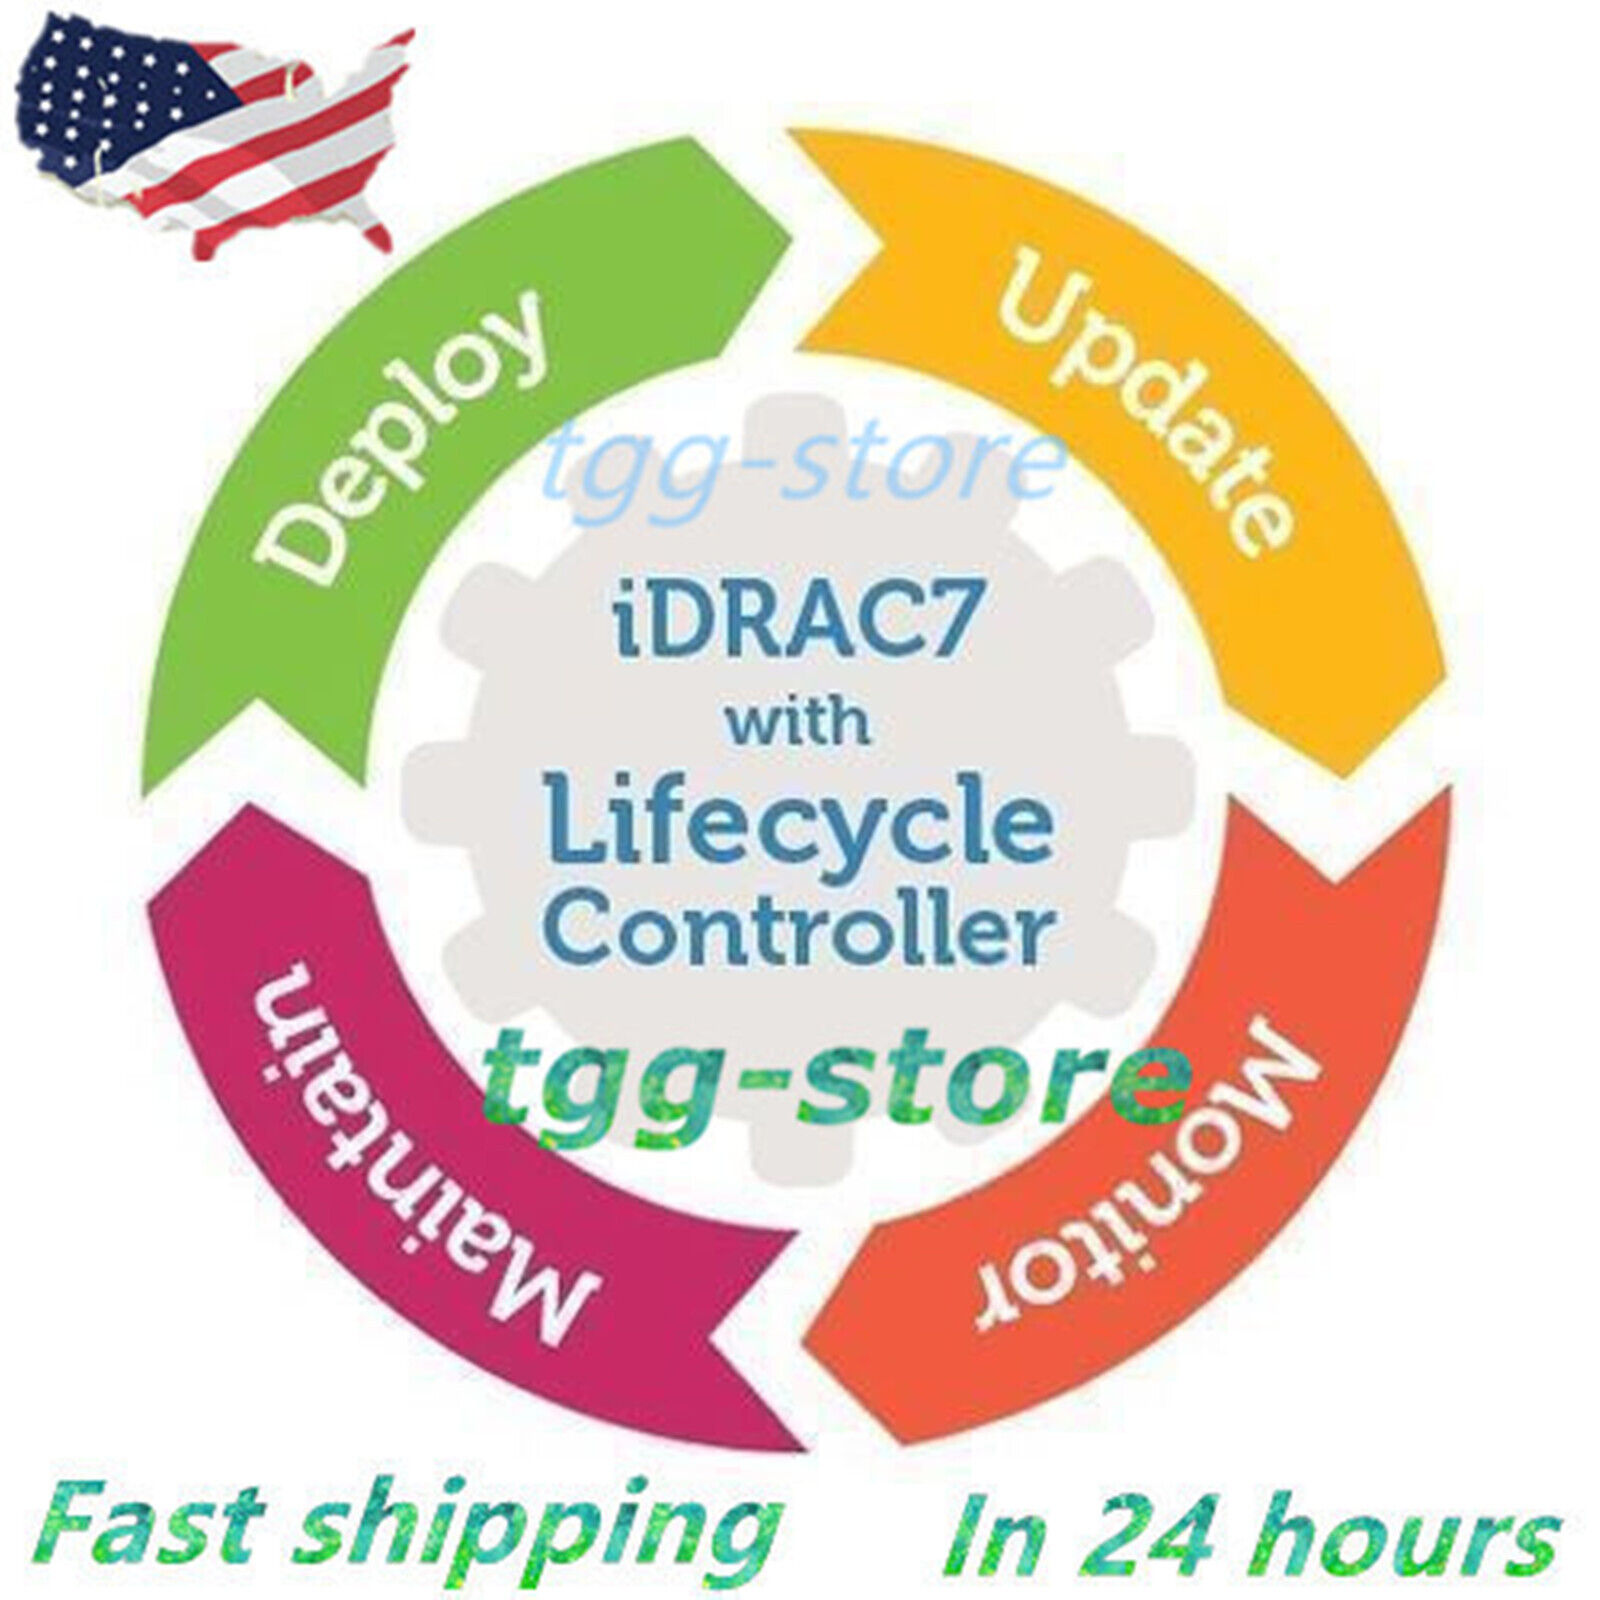 iDRAC7 iDRAC8 iDRAC9 iDRAC9 X5 iDRAC9 X6 DELL Enterprise License Life-time